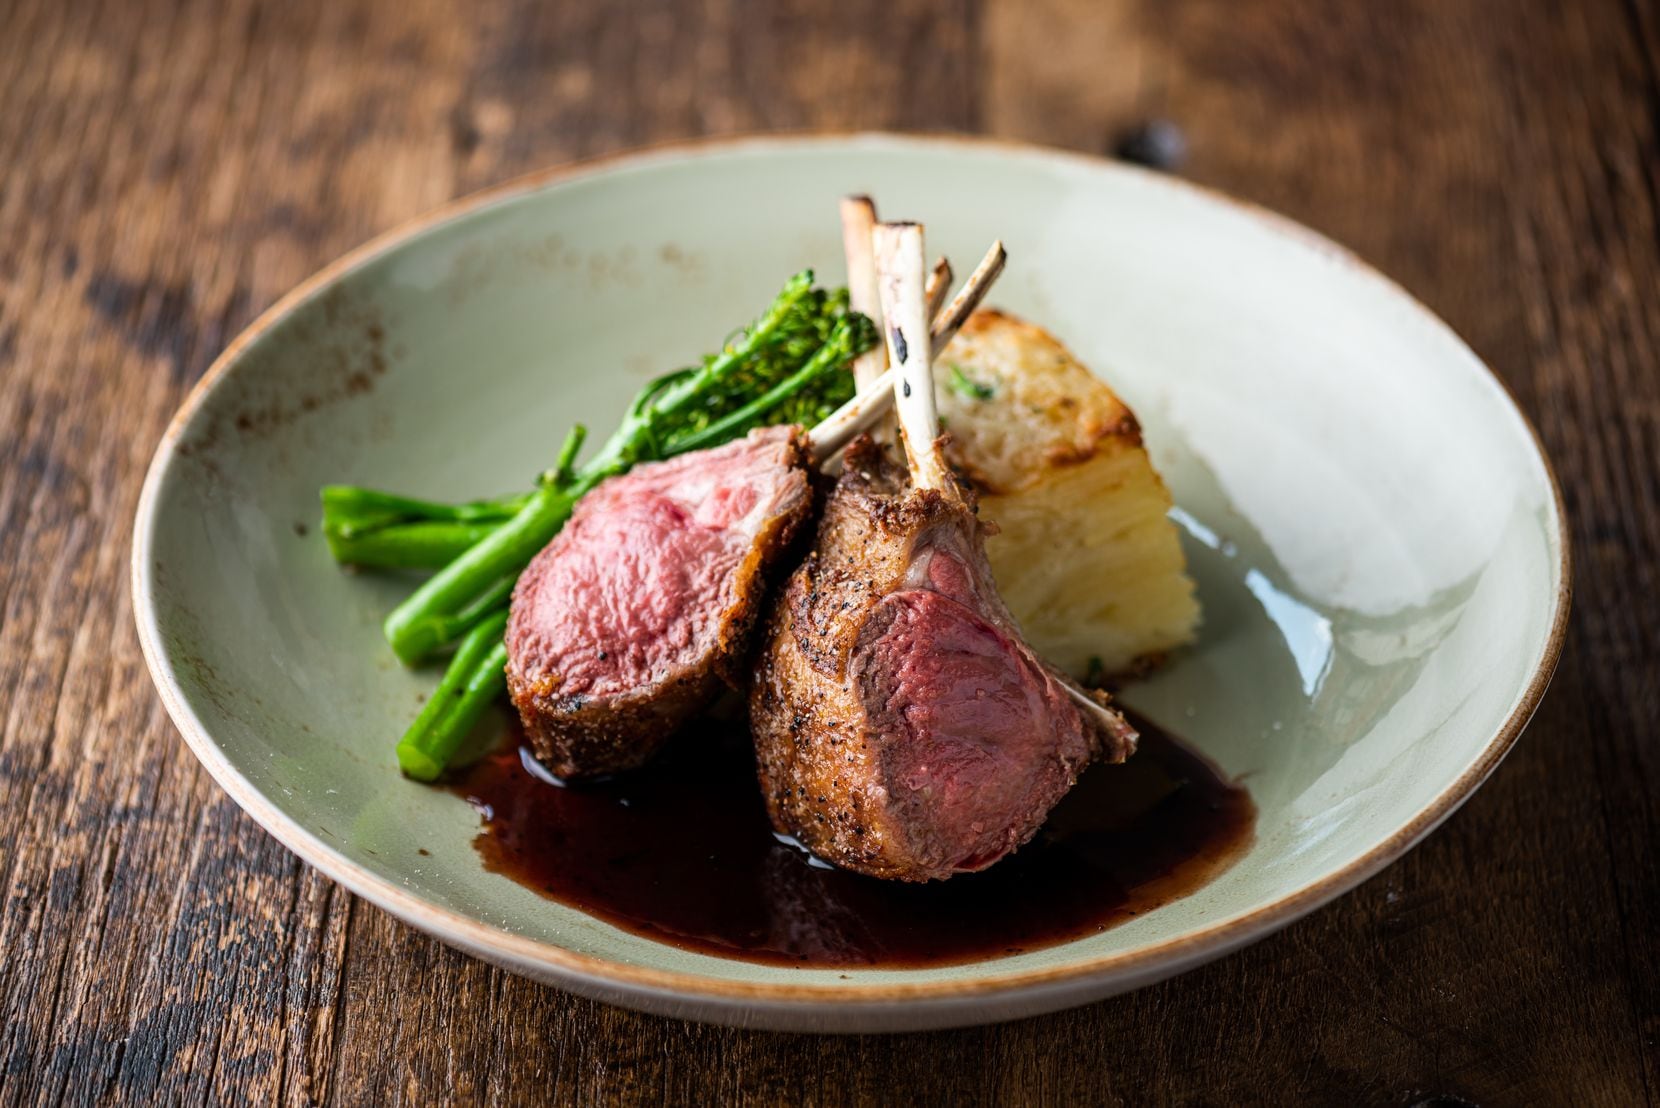 Cru Food and Wine Bar offers roasted rack of lamb with rosemary fingerling potatoes, blue cheese, calsami demi and crispy prosciutto as part of its Christmas Eve menu available for takeout and dine-in.